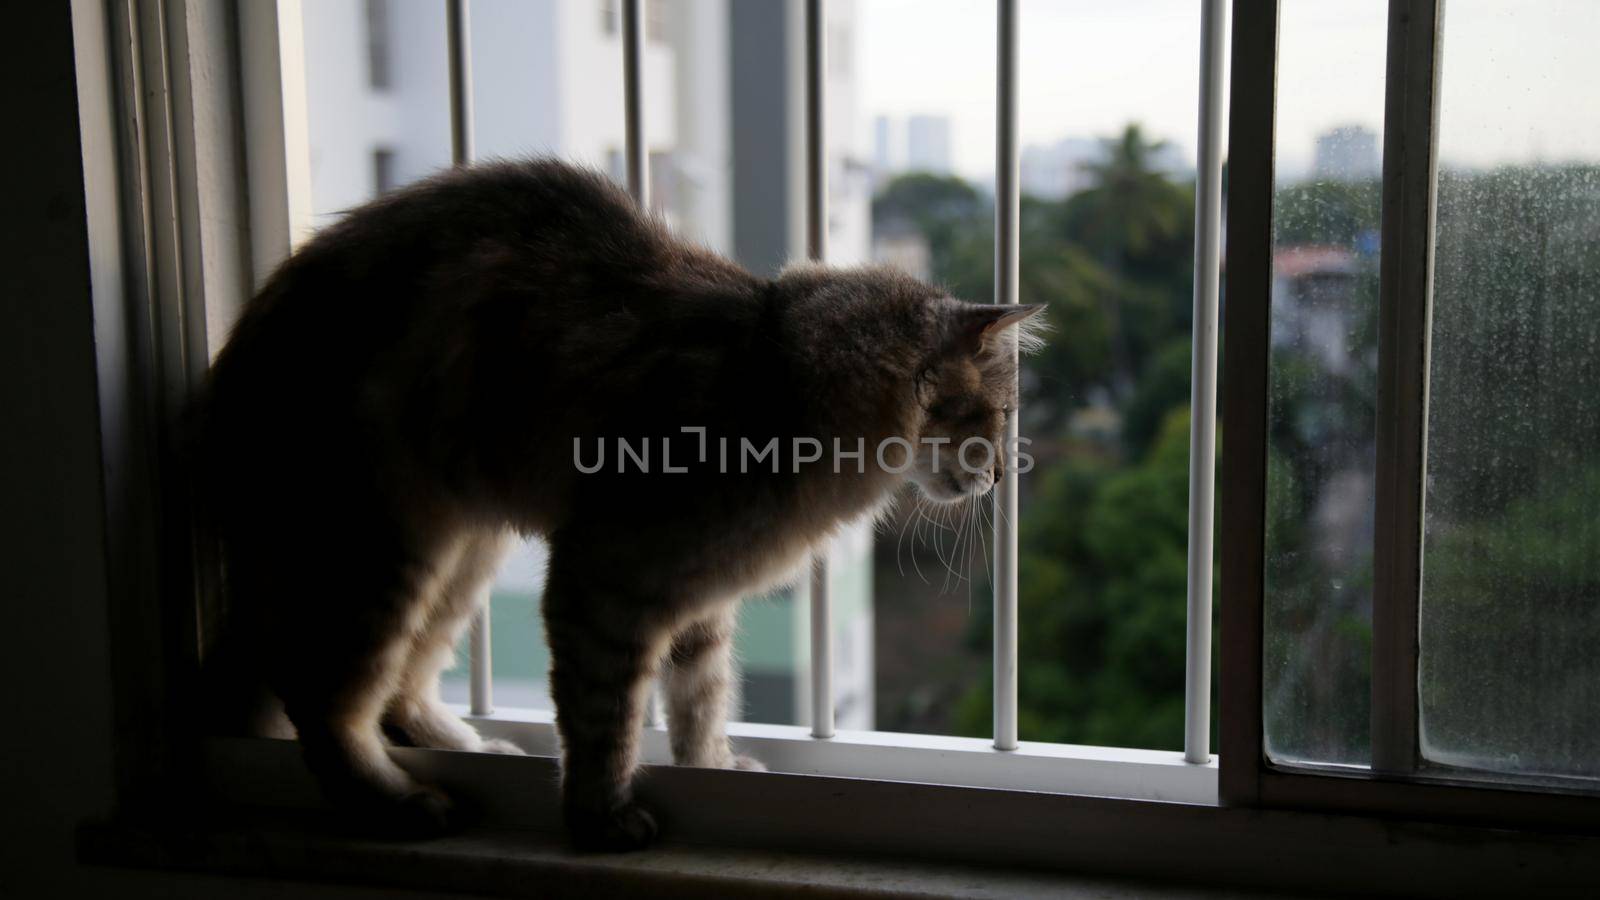 salvador, bahia brazil - may 27, 2020: cat is seen next to an apartment window railing during social isolation caused by the corona virus in the city of Salvador.

